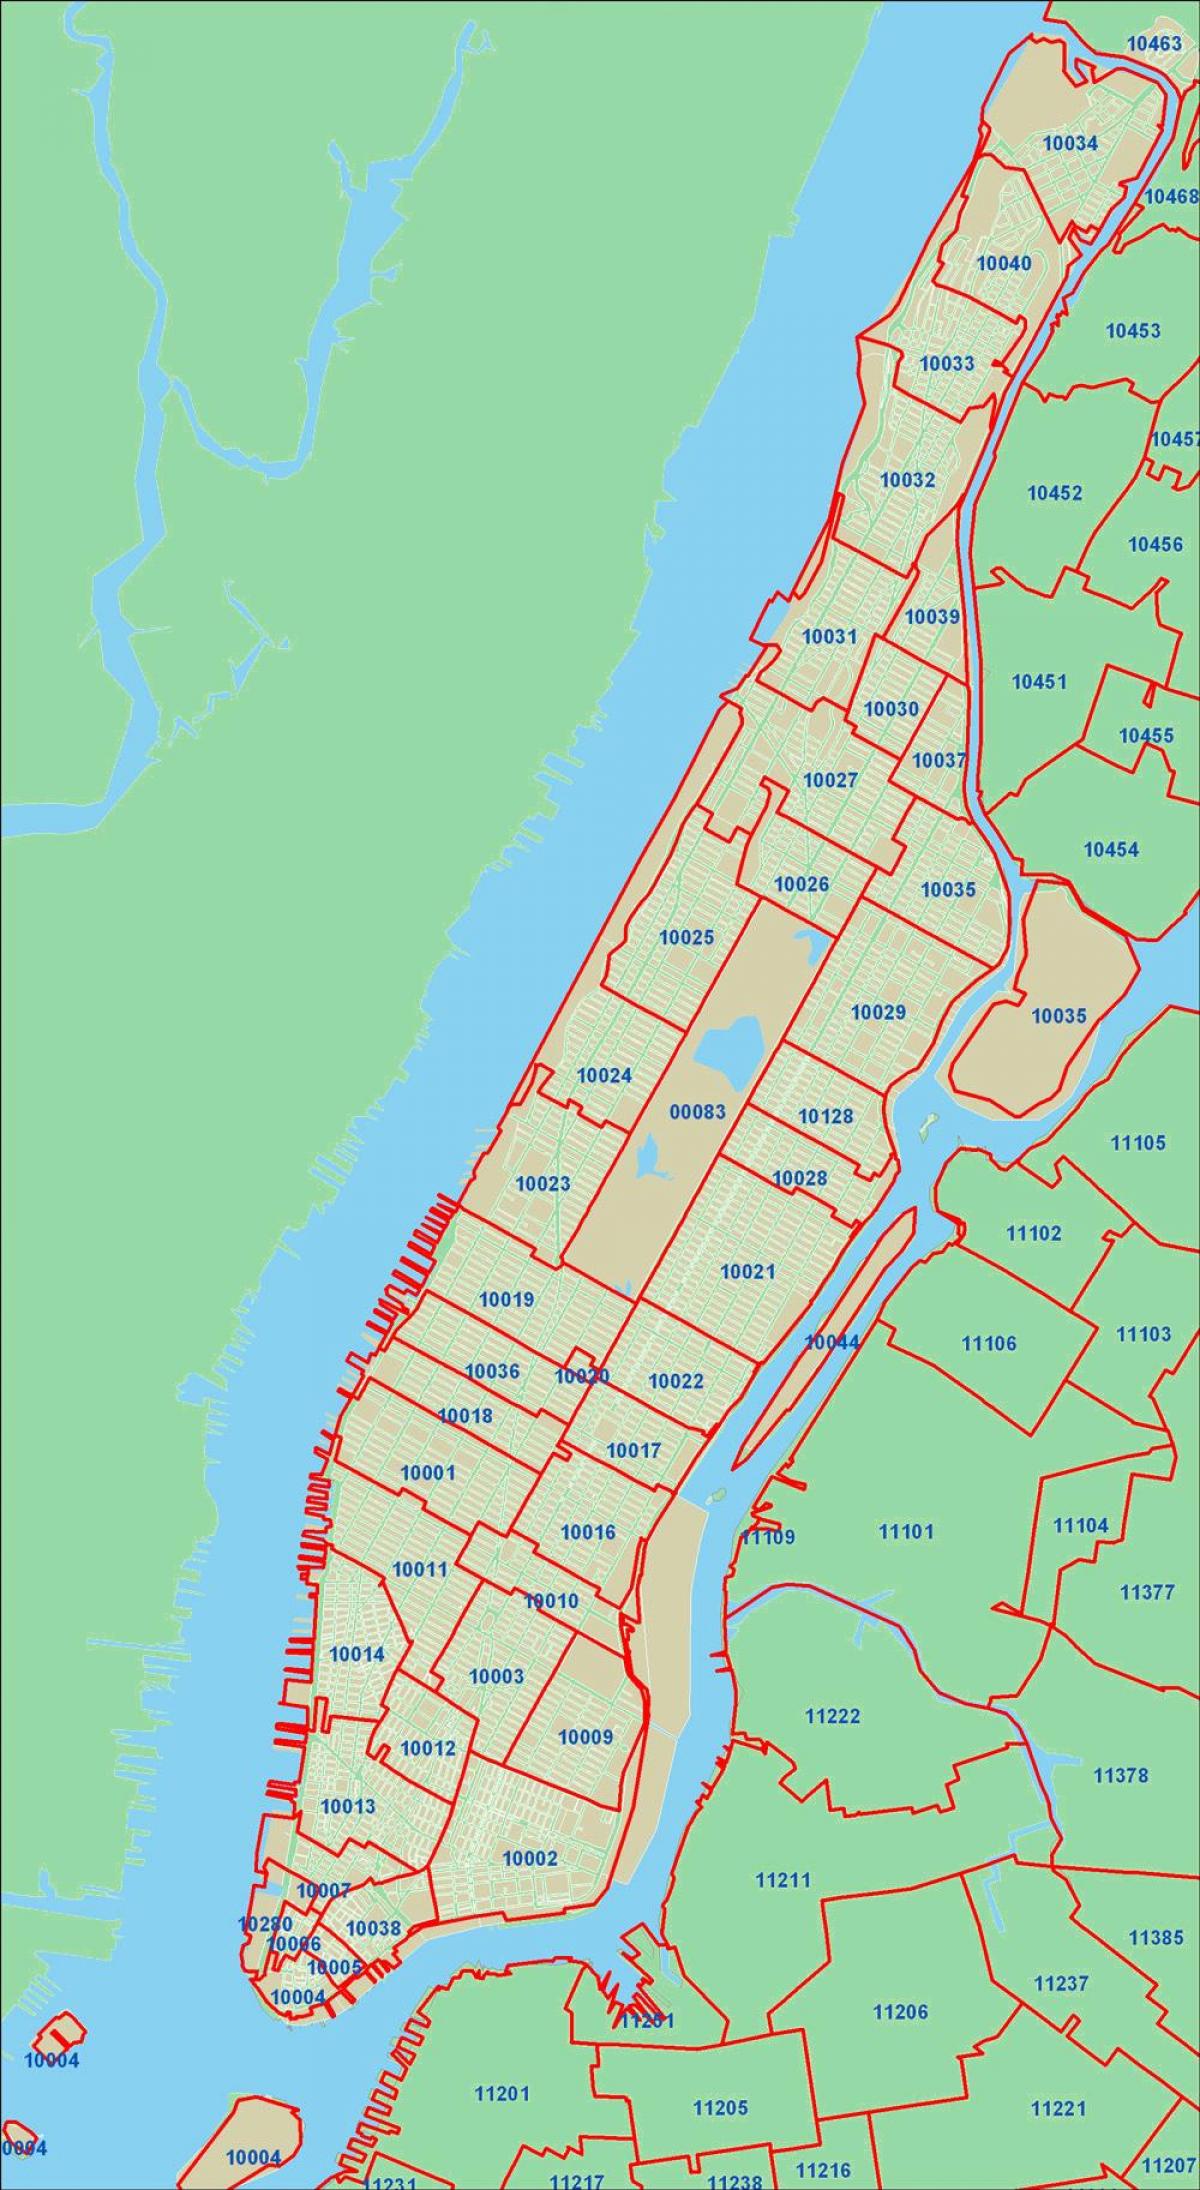 New York City area code map - Map of New York City area code (New York